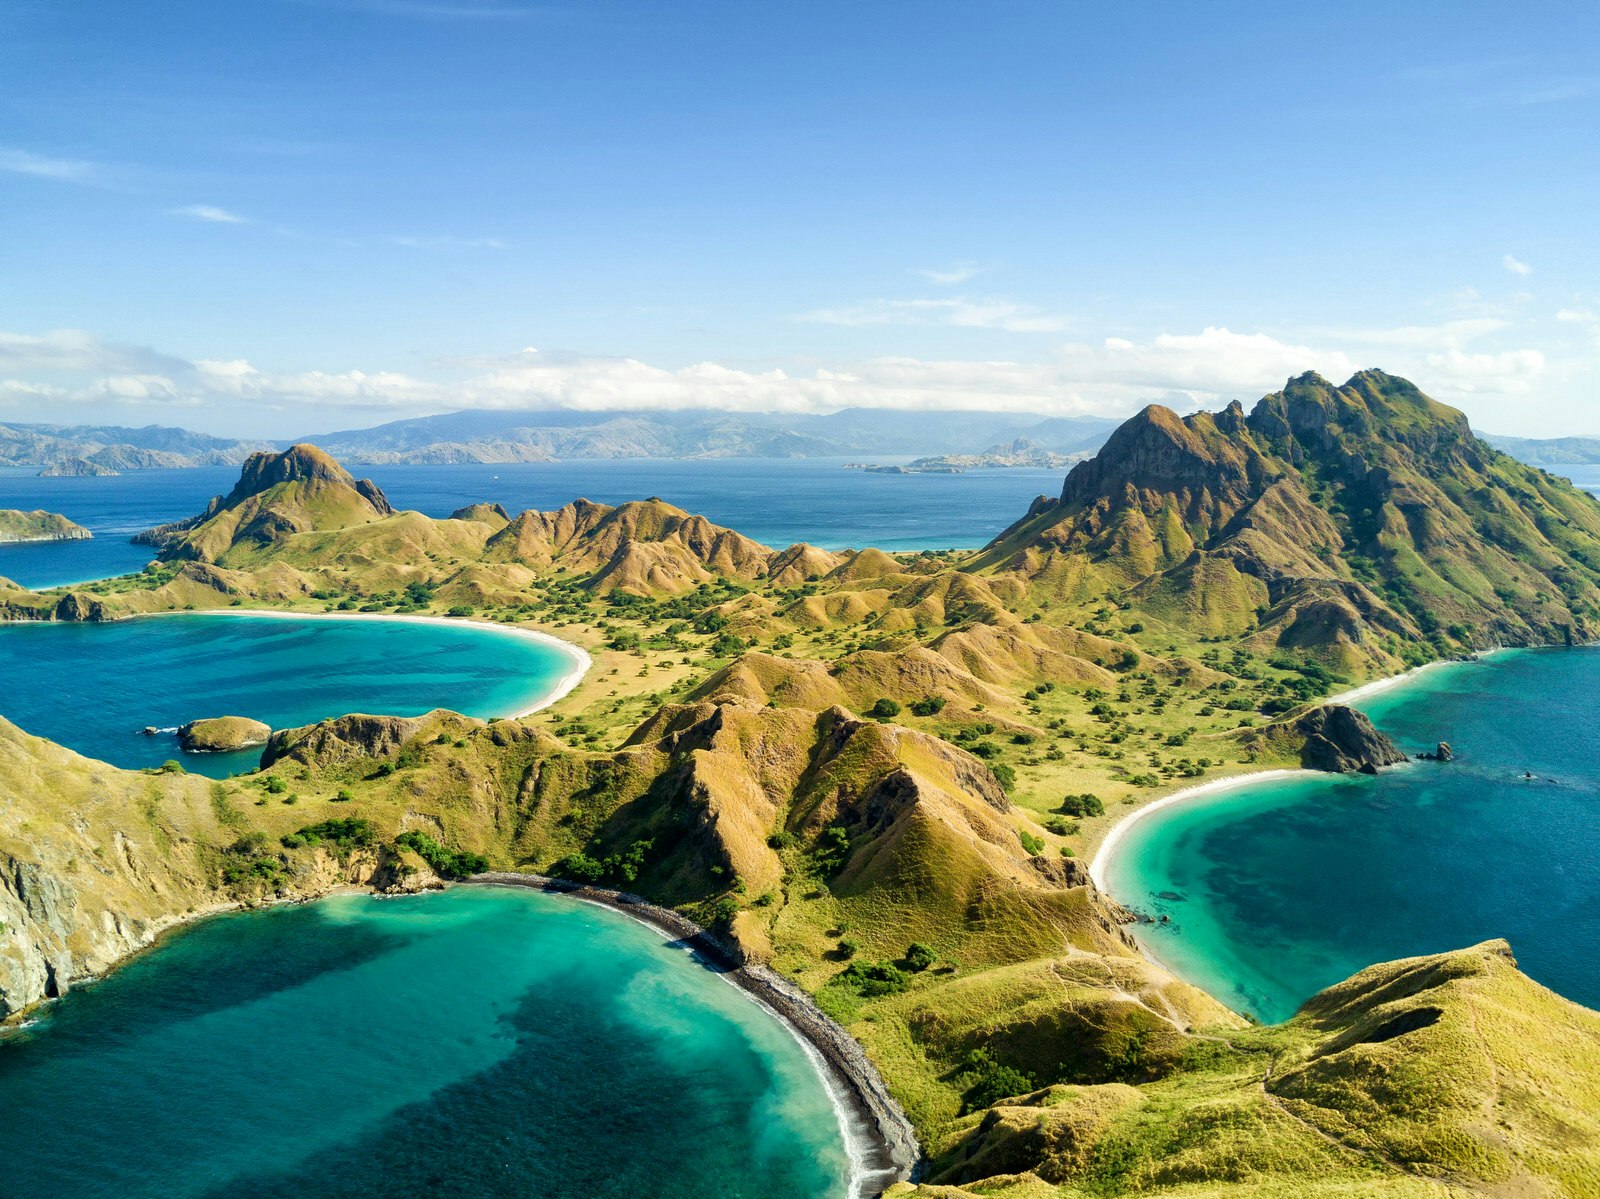 Aerial of the mountainous Pulau Padar island, Indonesia. Taken on a sunny day with a few fluffy clouds in the far distance, the verdant green hills contrast against the deep, jewel-blue sea. 